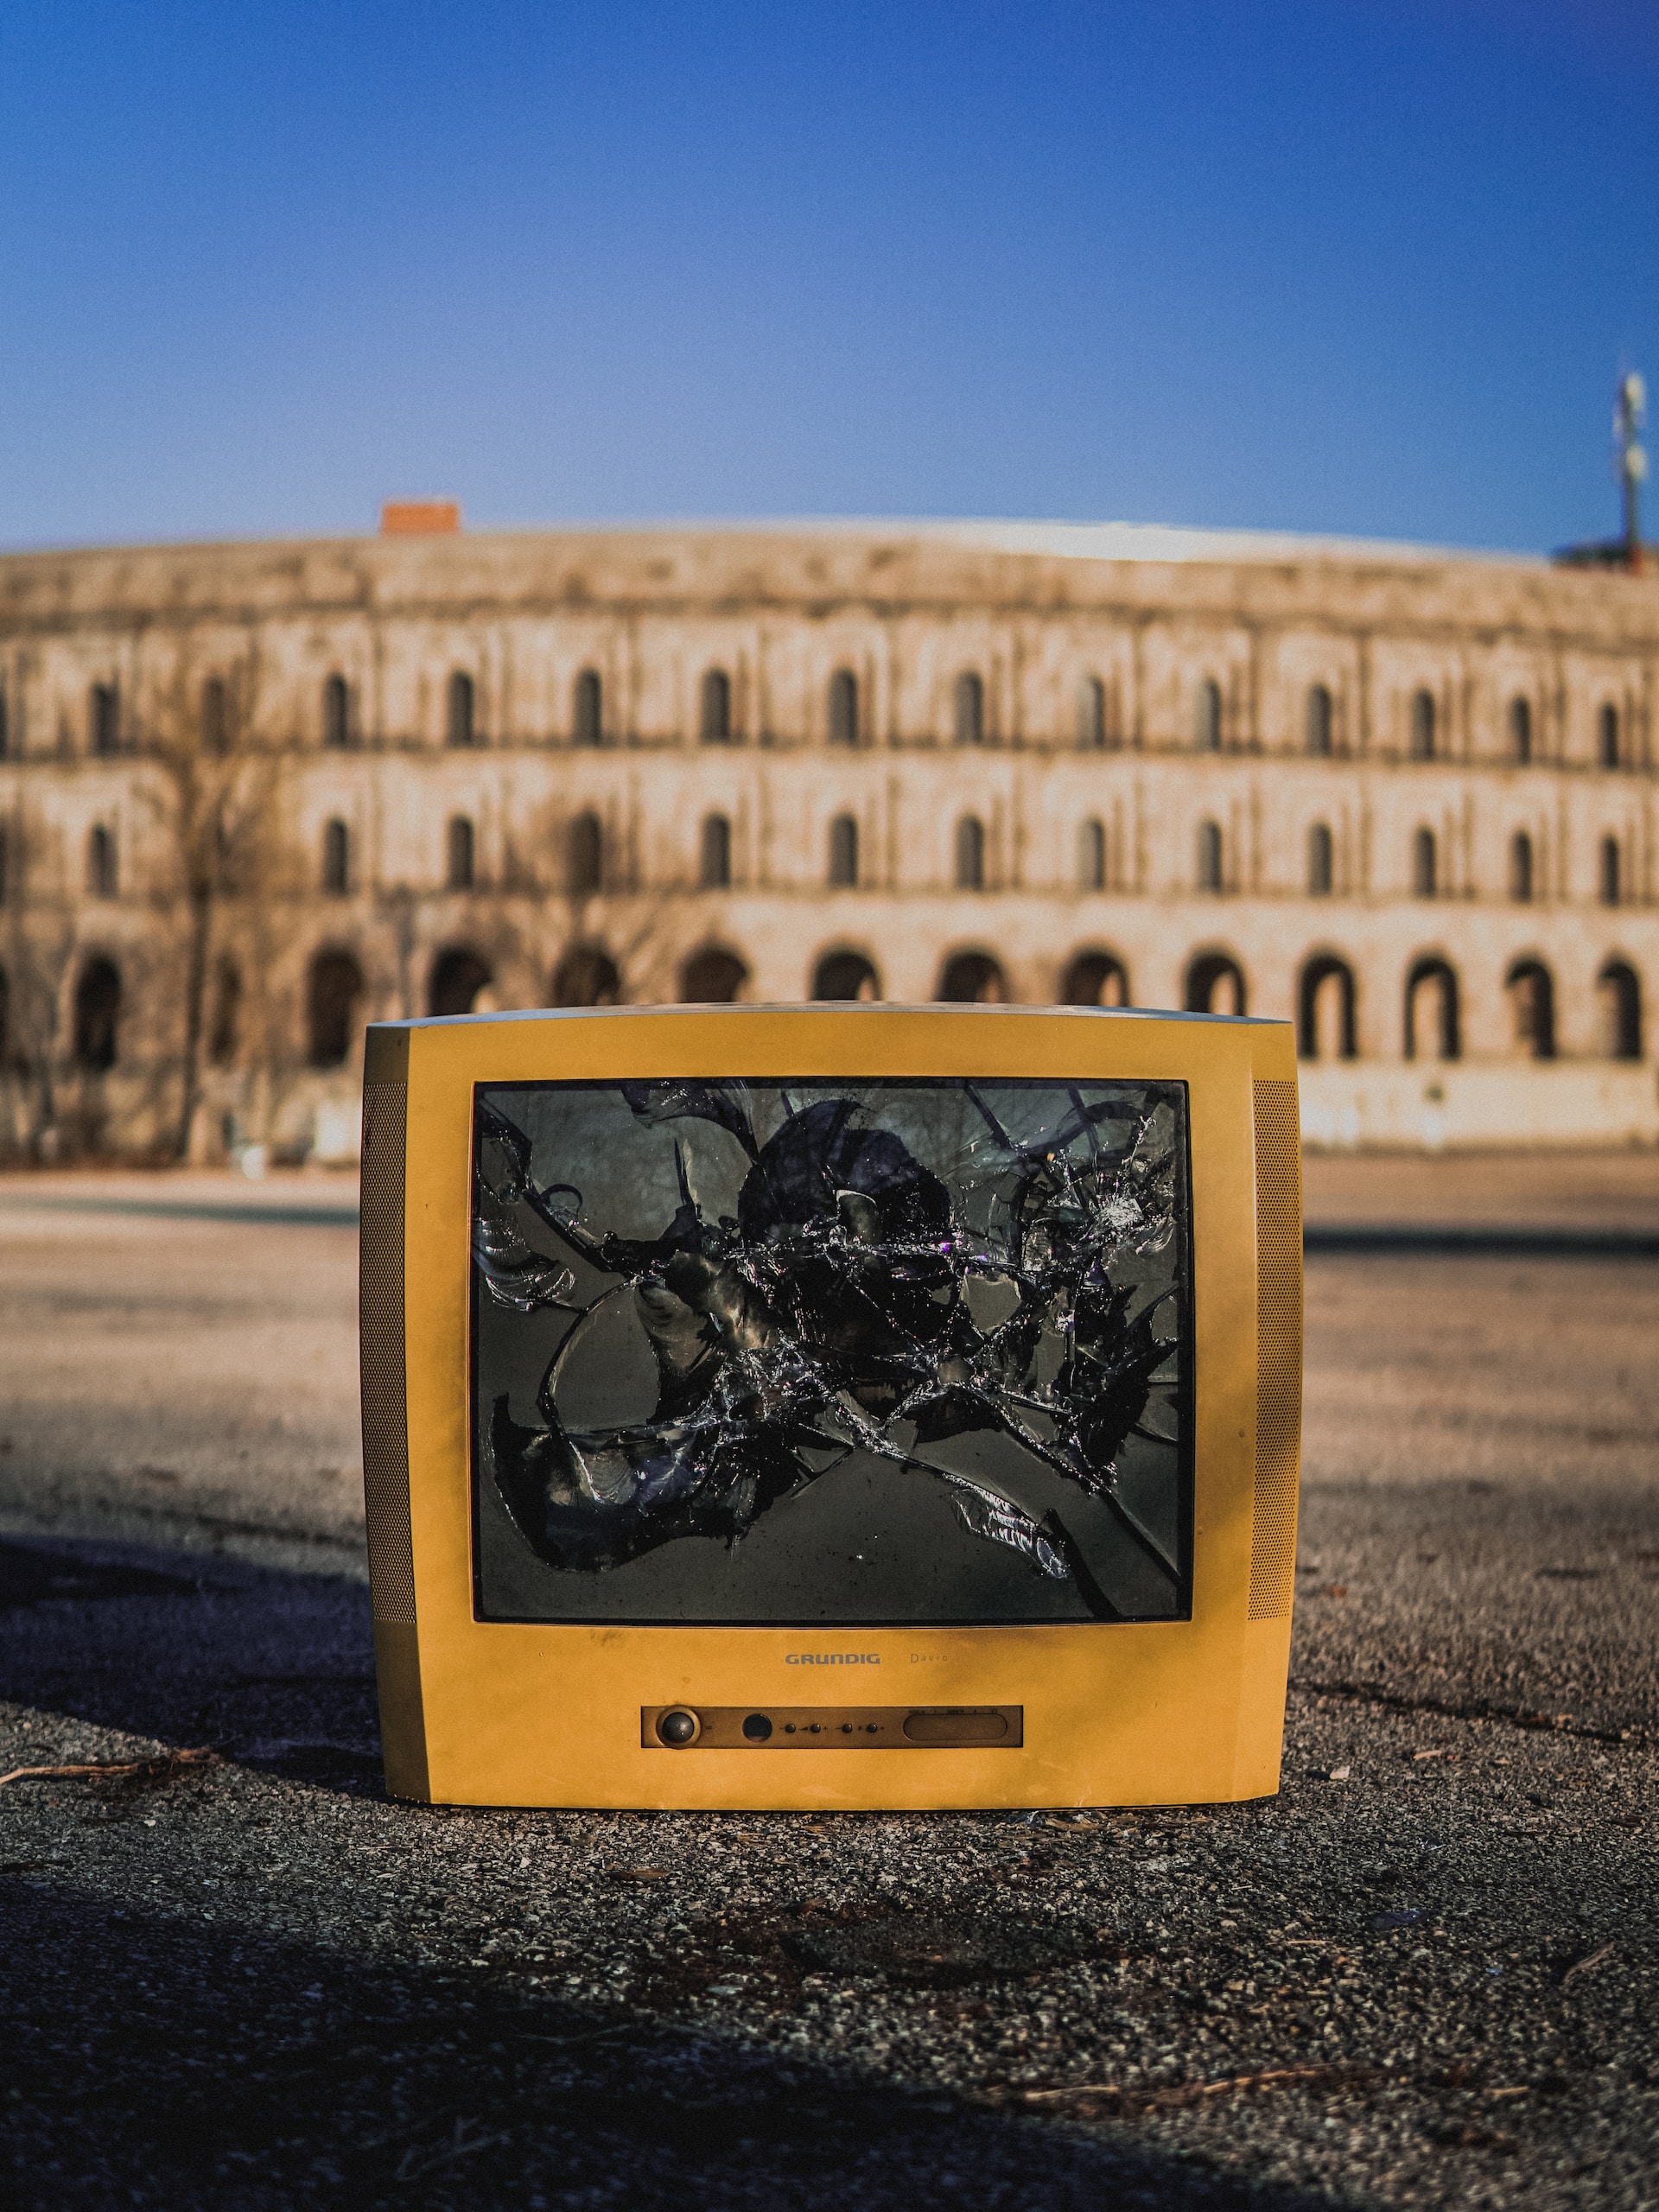 A cracked monitor outdoors